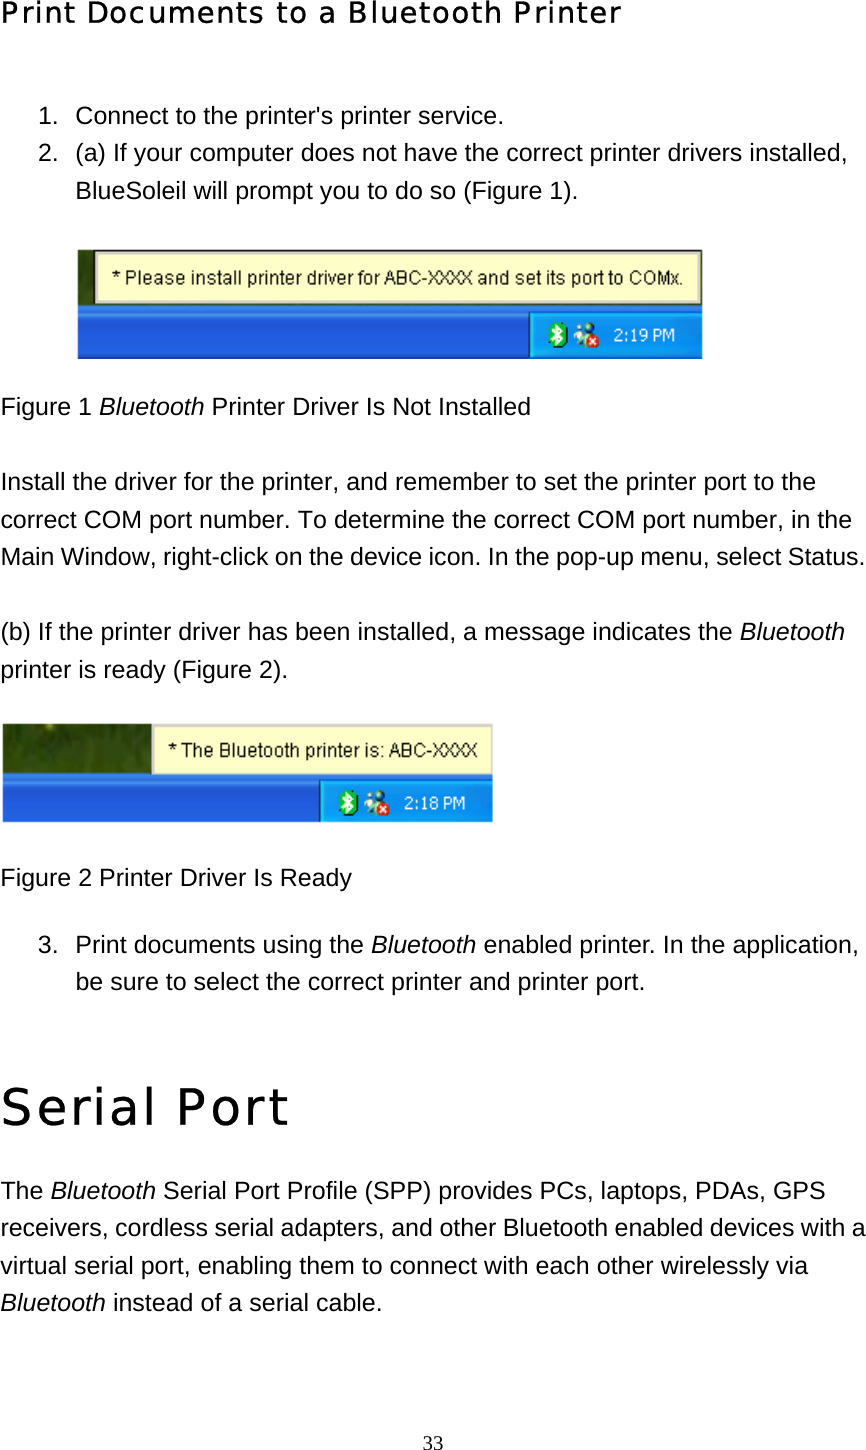   33Print Documents to a Bluetooth Printer 1.  Connect to the printer&apos;s printer service.   2.  (a) If your computer does not have the correct printer drivers installed, BlueSoleil will prompt you to do so (Figure 1).   Figure 1 Bluetooth Printer Driver Is Not Installed  Install the driver for the printer, and remember to set the printer port to the correct COM port number. To determine the correct COM port number, in the Main Window, right-click on the device icon. In the pop-up menu, select Status.  (b) If the printer driver has been installed, a message indicates the Bluetooth printer is ready (Figure 2).    Figure 2 Printer Driver Is Ready 3.  Print documents using the Bluetooth enabled printer. In the application, be sure to select the correct printer and printer port.     Serial Port The Bluetooth Serial Port Profile (SPP) provides PCs, laptops, PDAs, GPS receivers, cordless serial adapters, and other Bluetooth enabled devices with a virtual serial port, enabling them to connect with each other wirelessly via Bluetooth instead of a serial cable. 